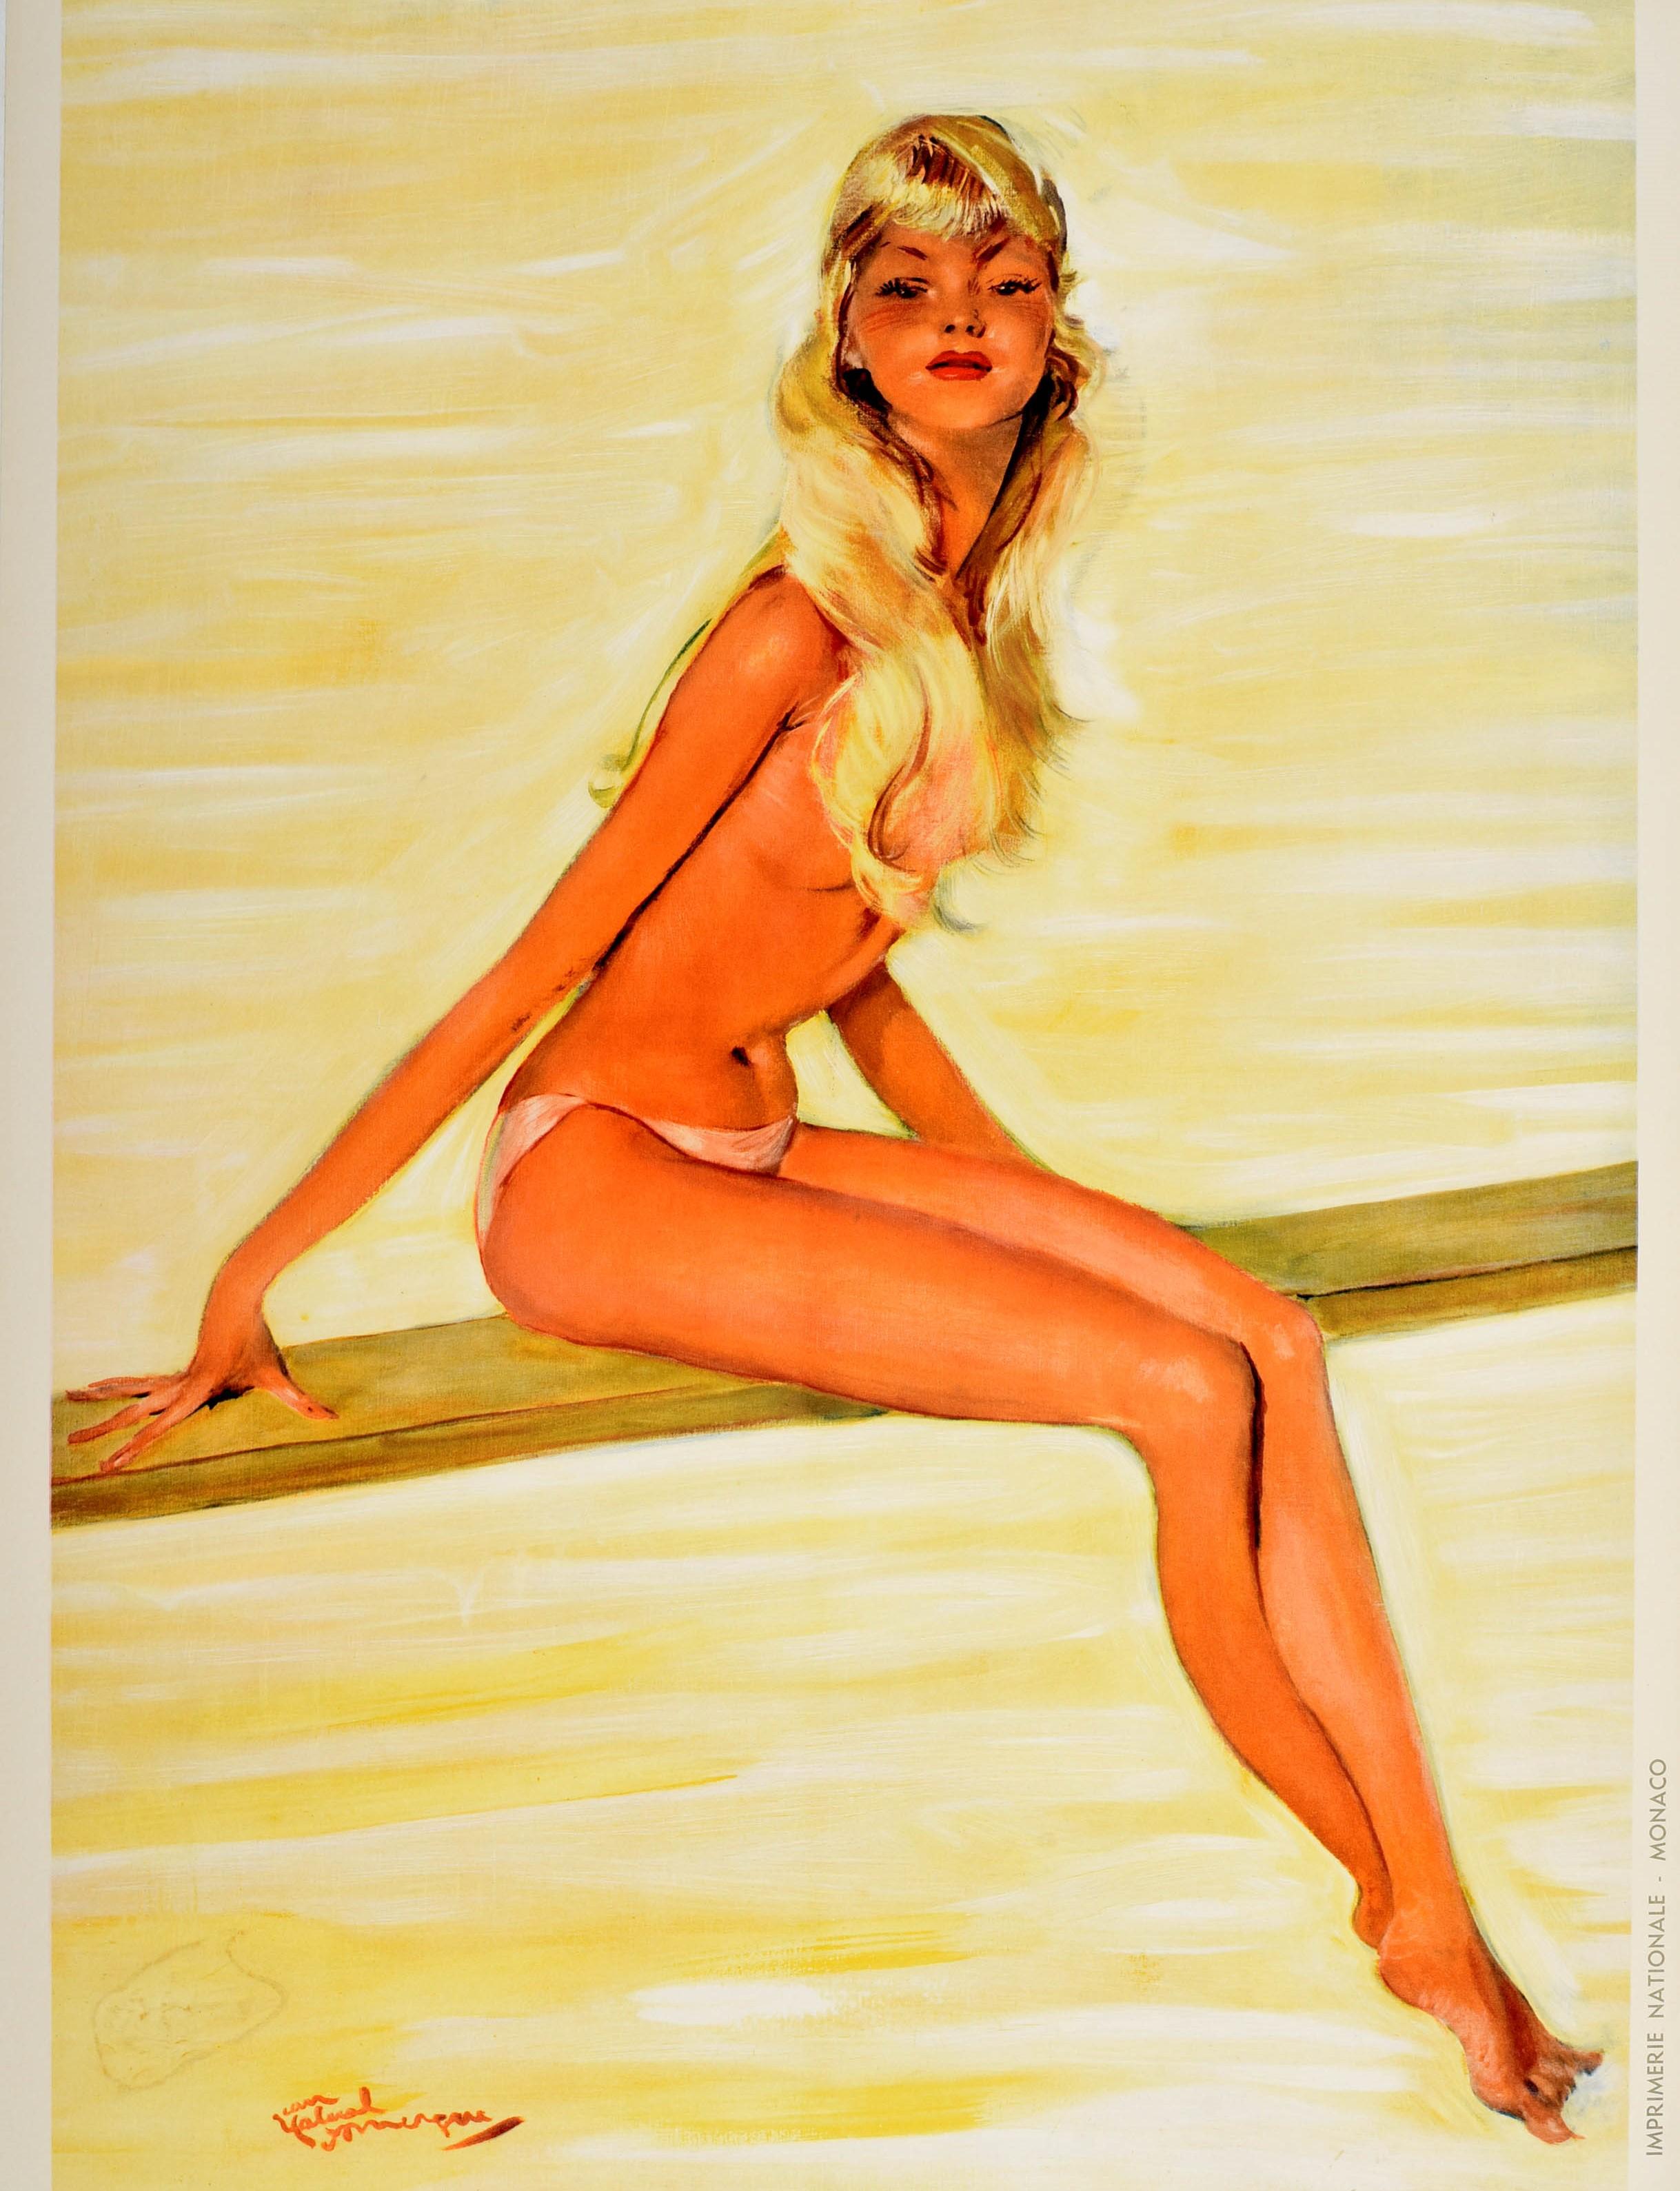 old pin up girl posters